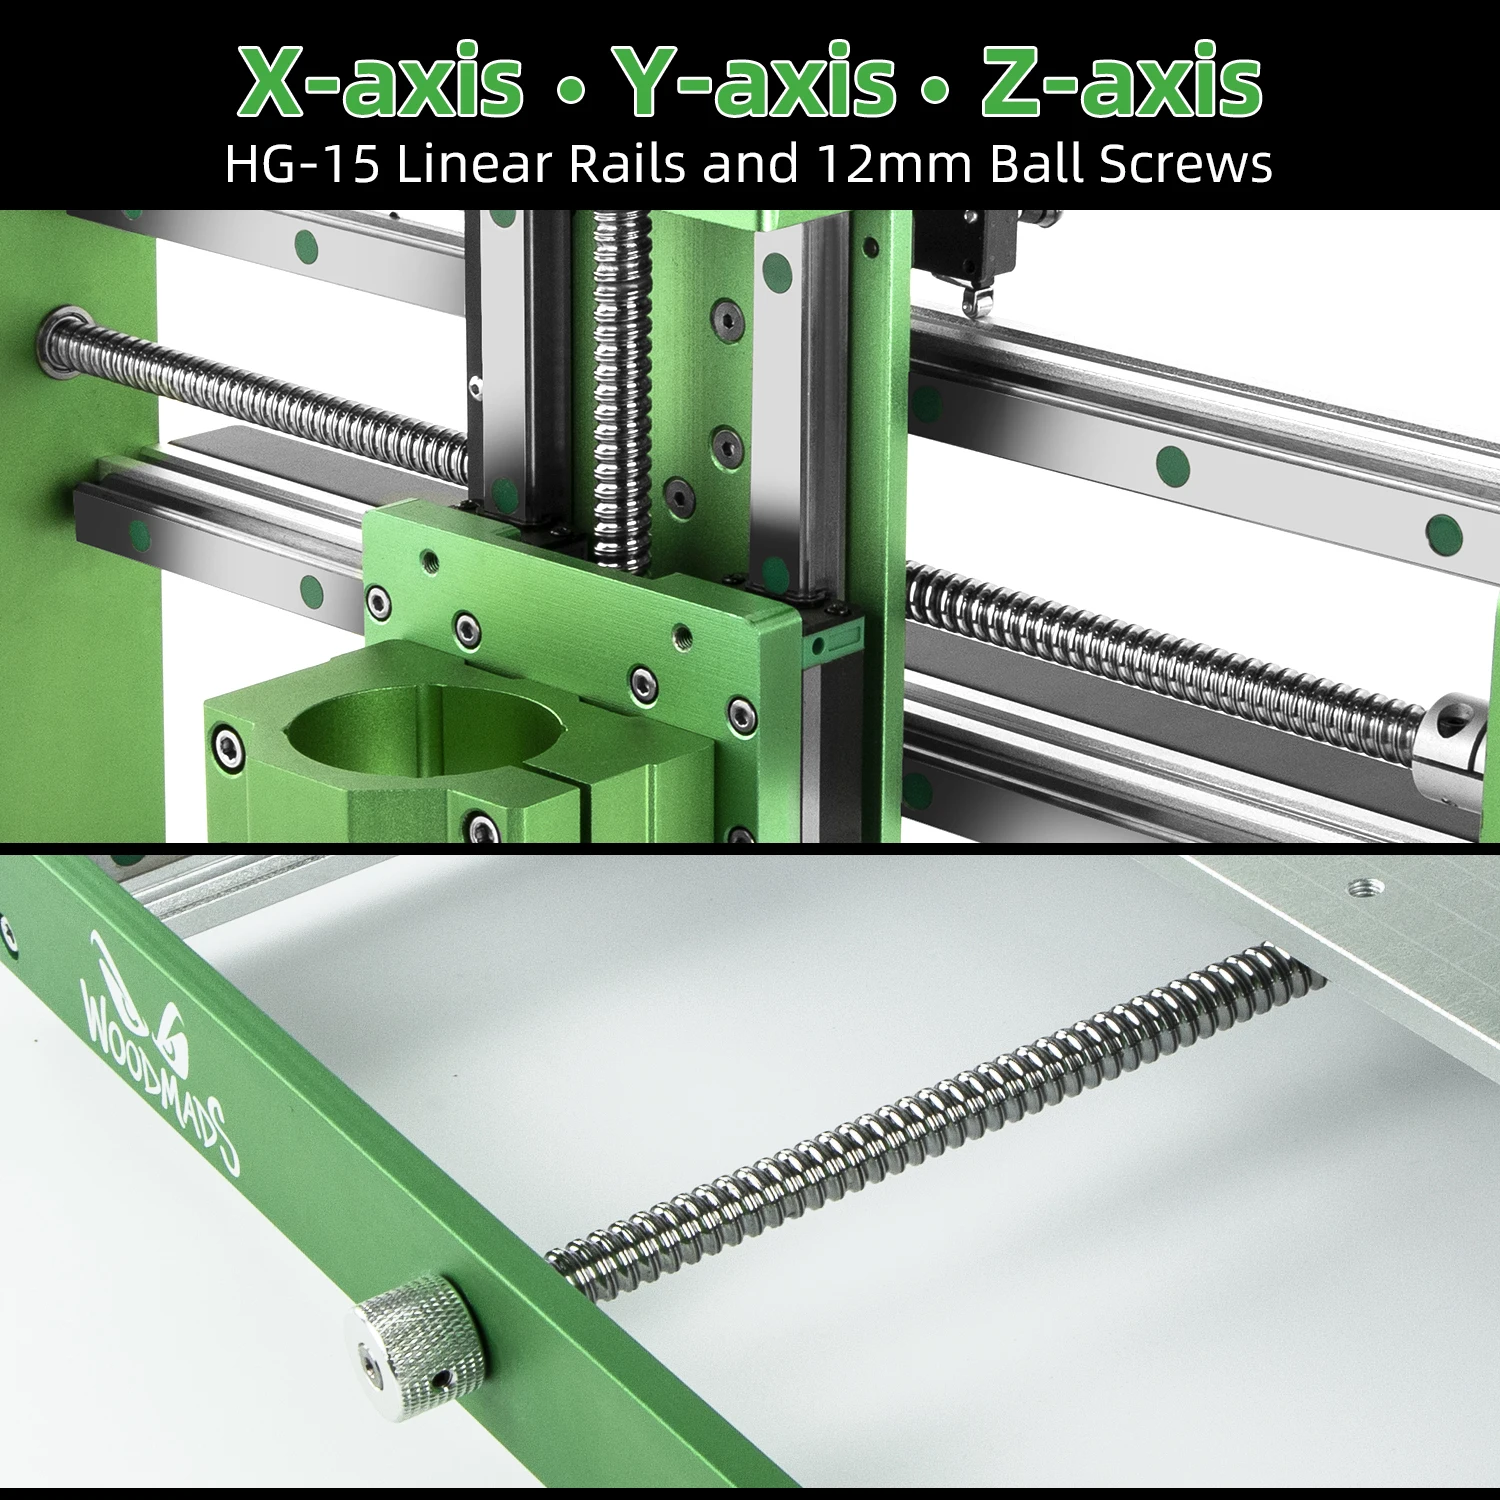 FoxAlien WoodMads All Metal CNC Router Machine, 3 Axis Desktop Linear Rail Ball Screw Aluminum Milling Machine with 300W Spindle enlarge